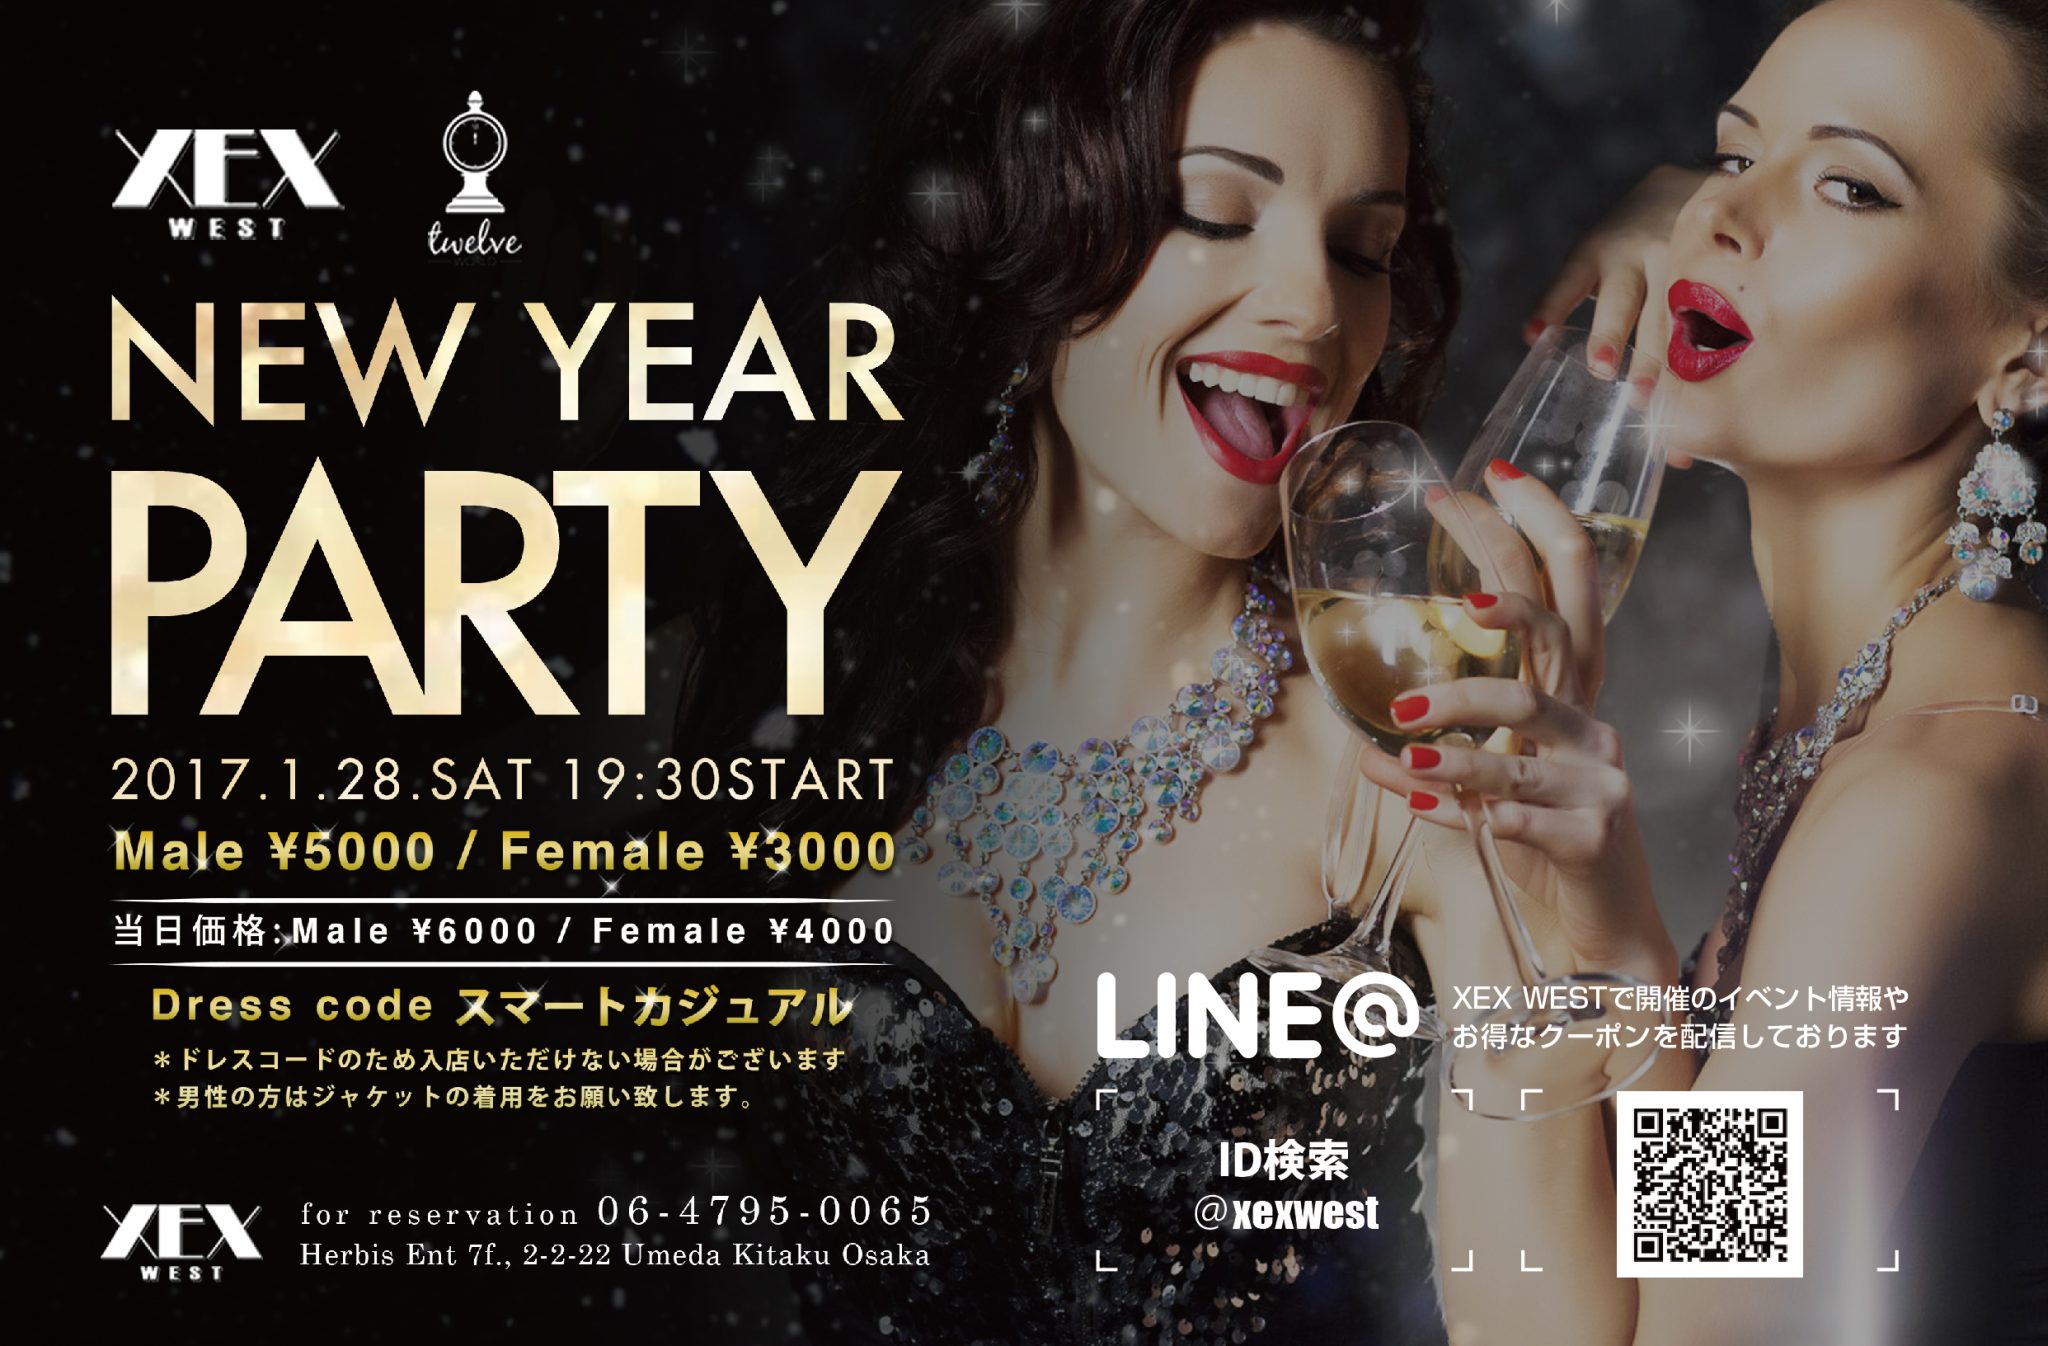 XEX WEST New Year Party